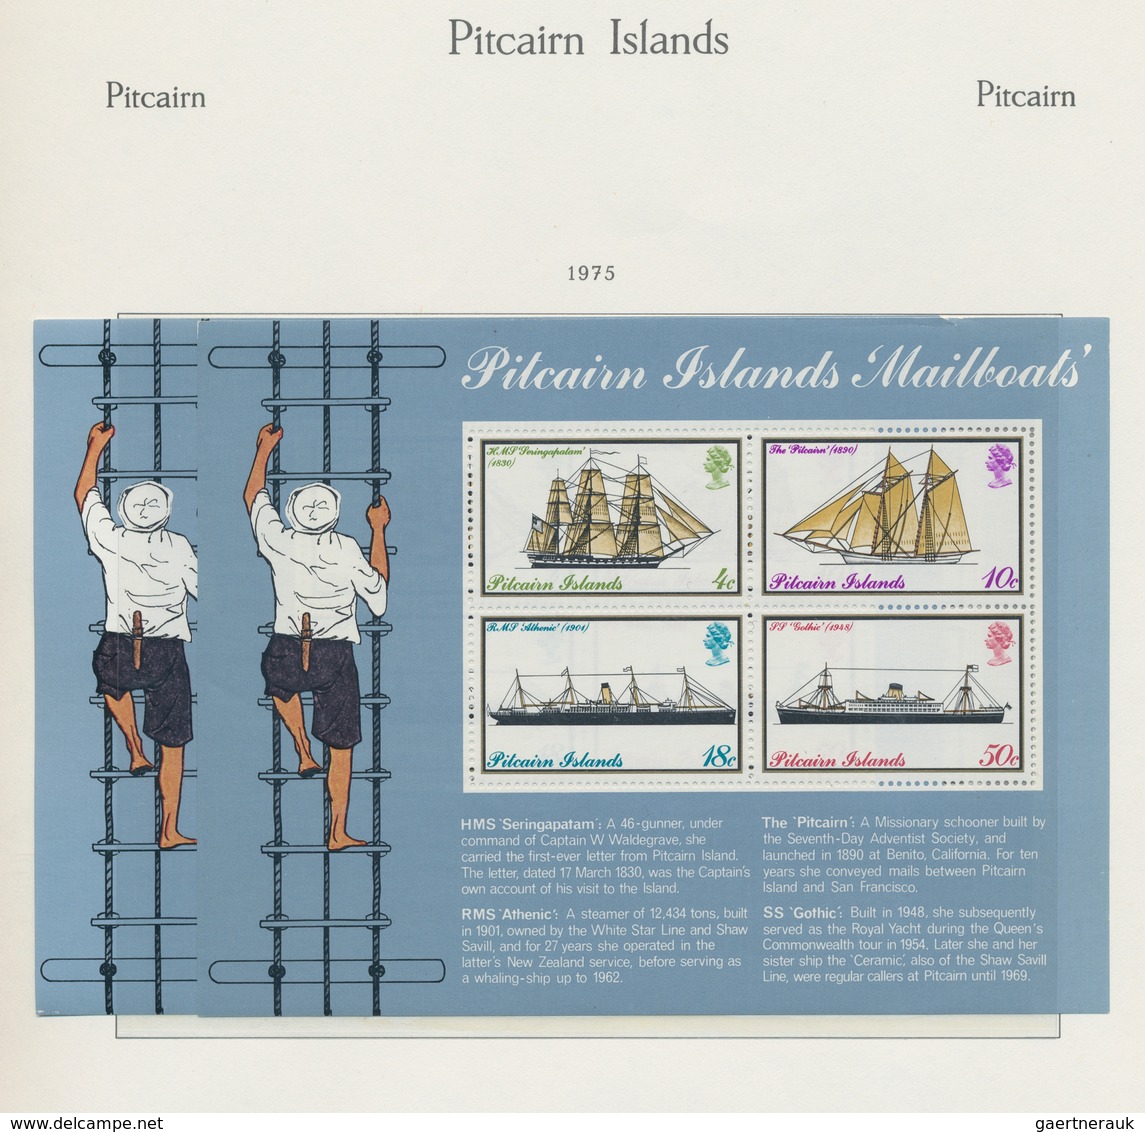 Pitcairn: 1940/1999, almost exclusively u/m collection (only a few are hinged) in a KA/BE binder, ac